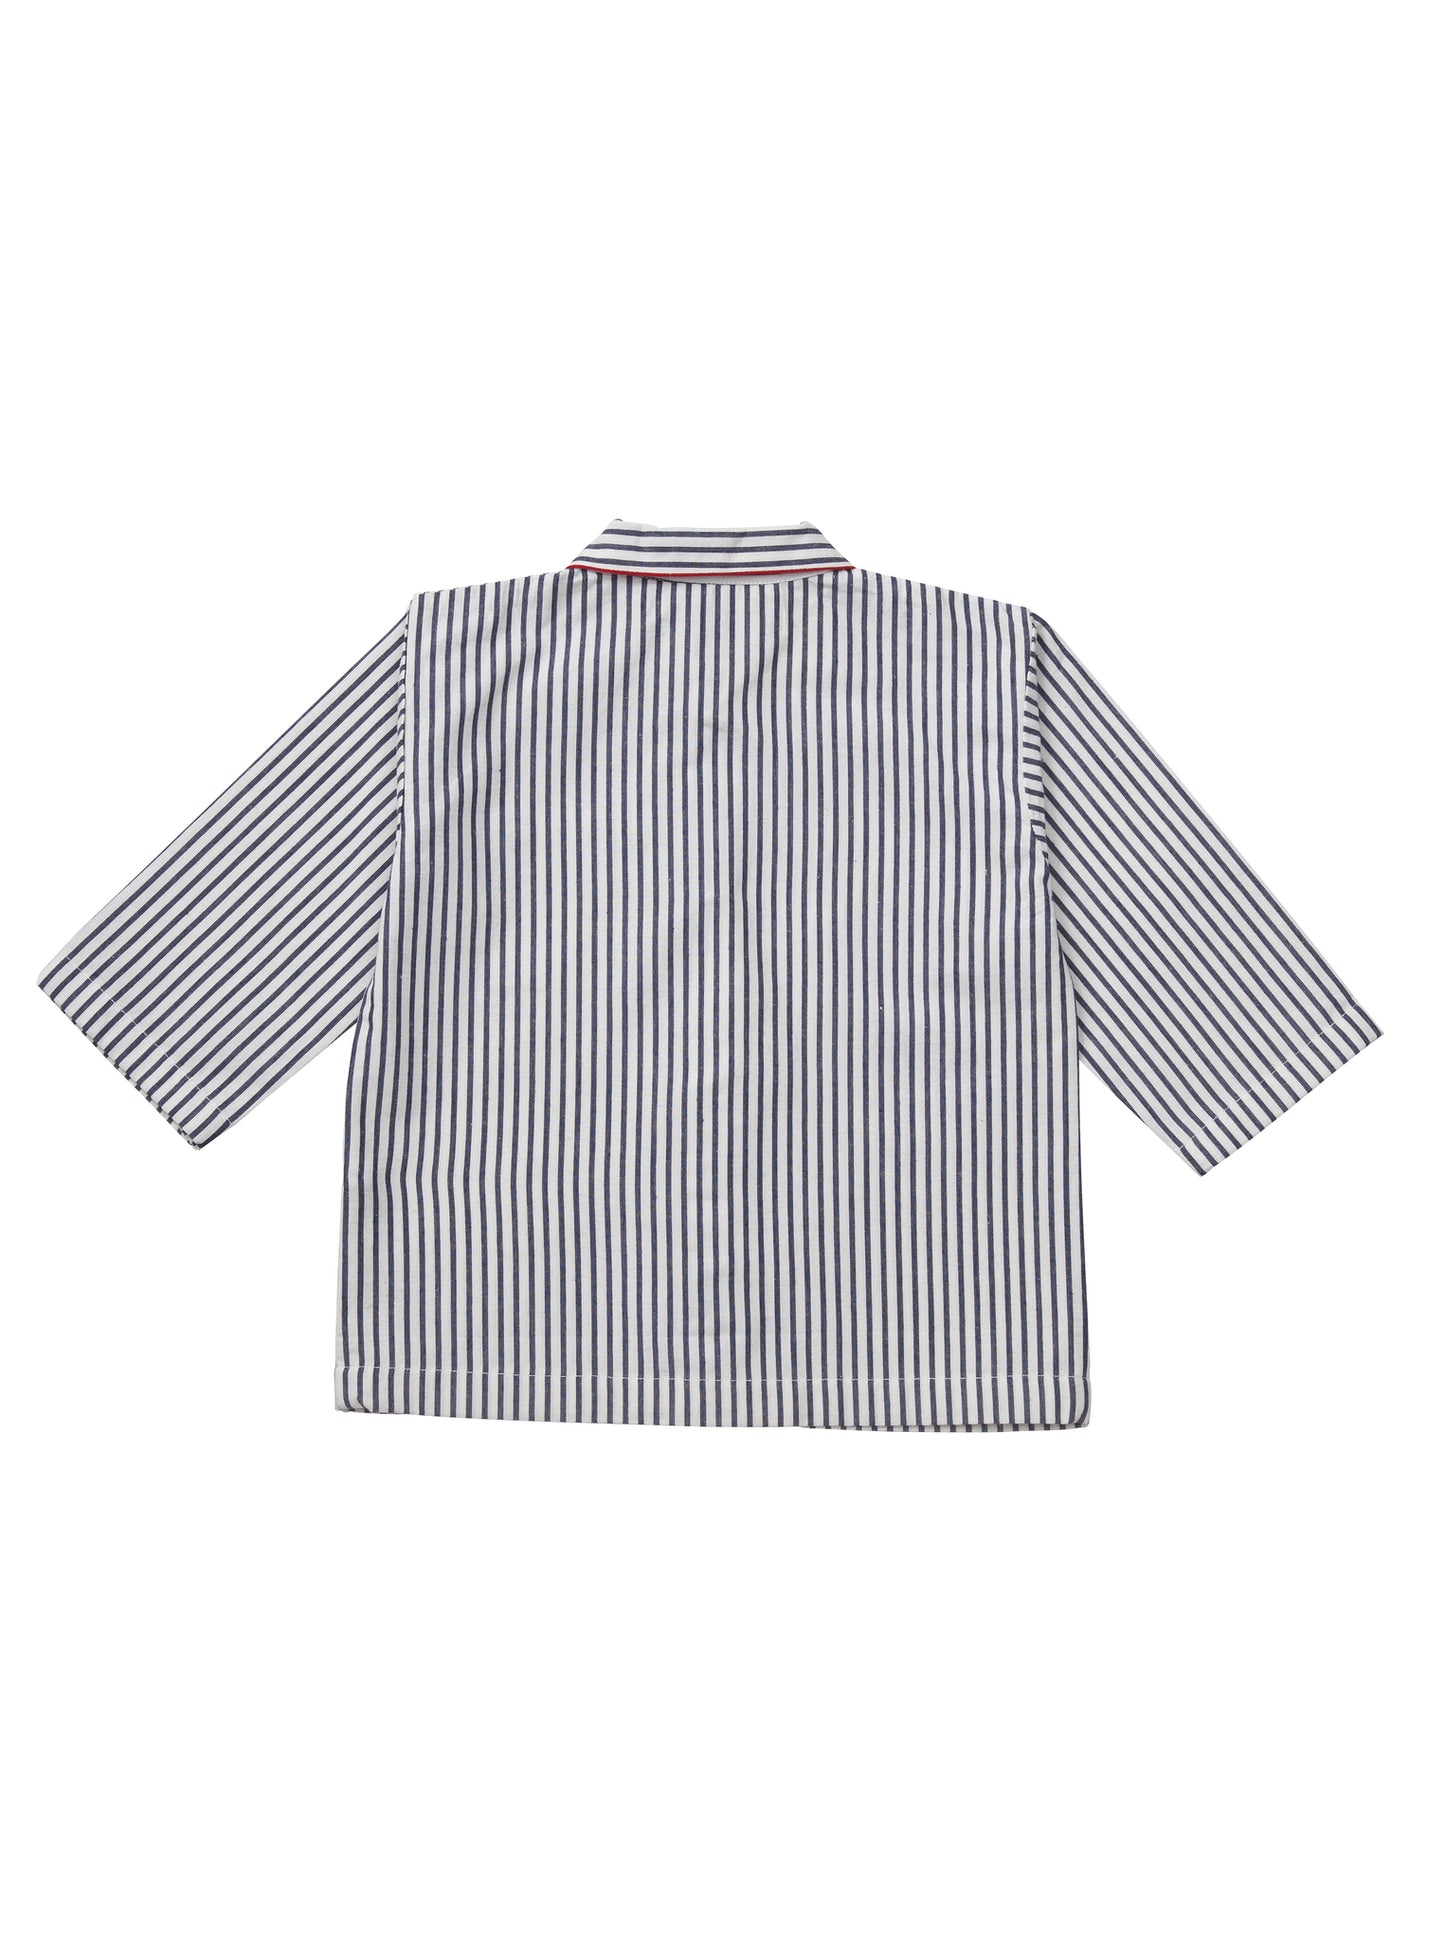 Classic striped cotton pyjama for children from Turquaz, with red trimming.